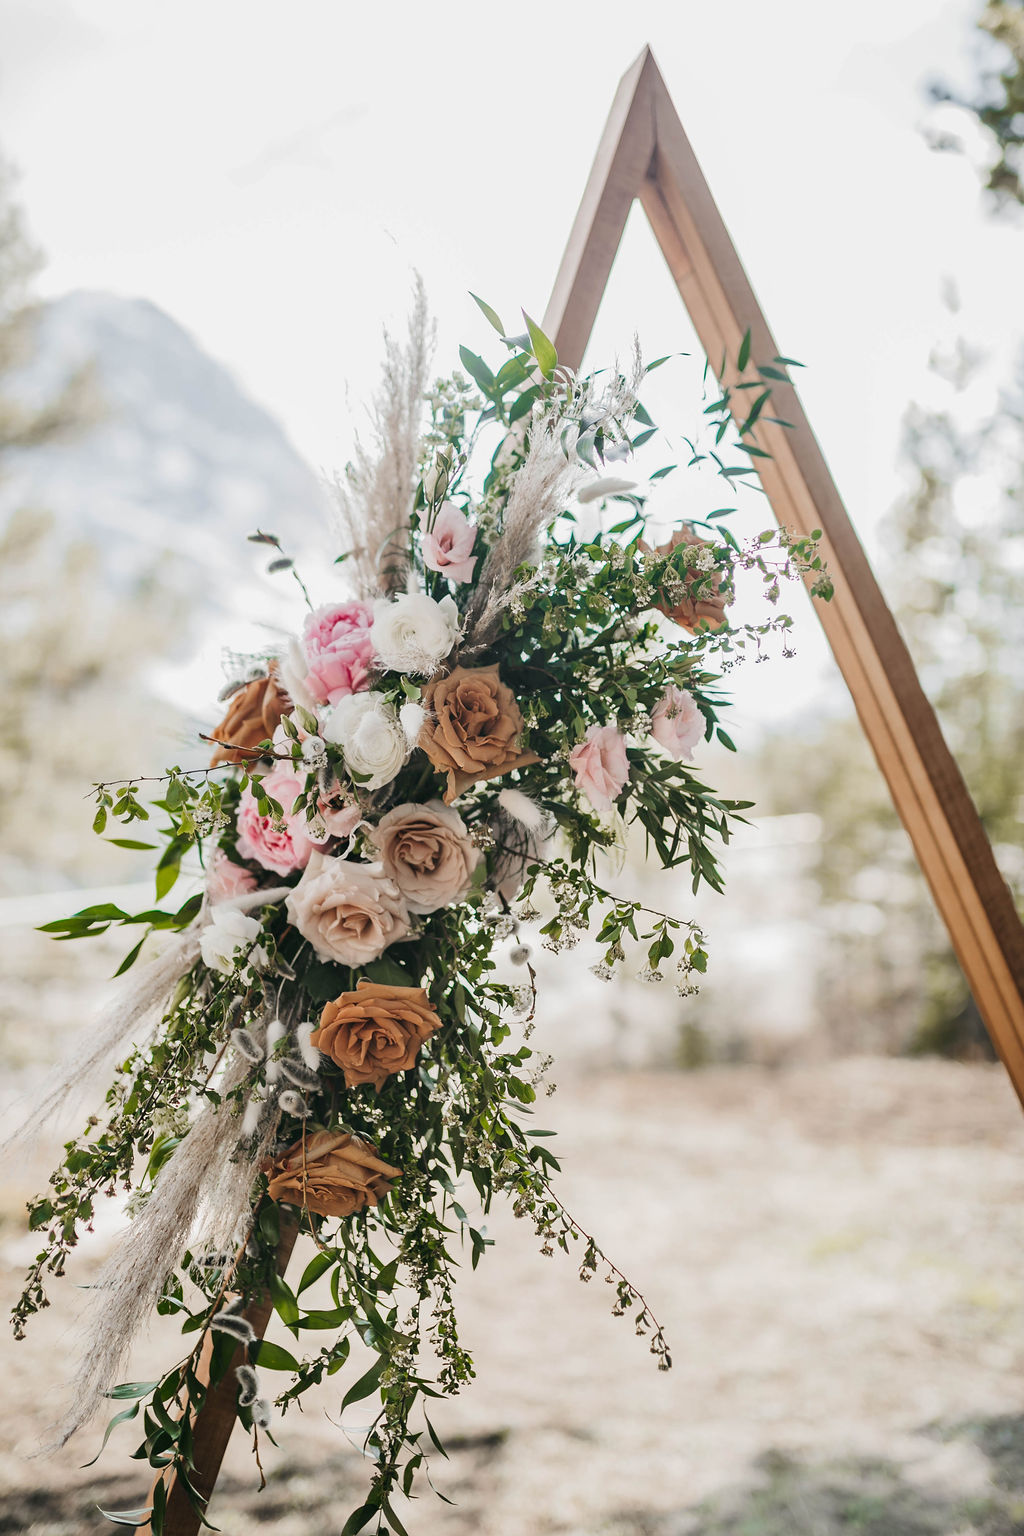 Toffee, caramel and blush roses on a triangle flower arch